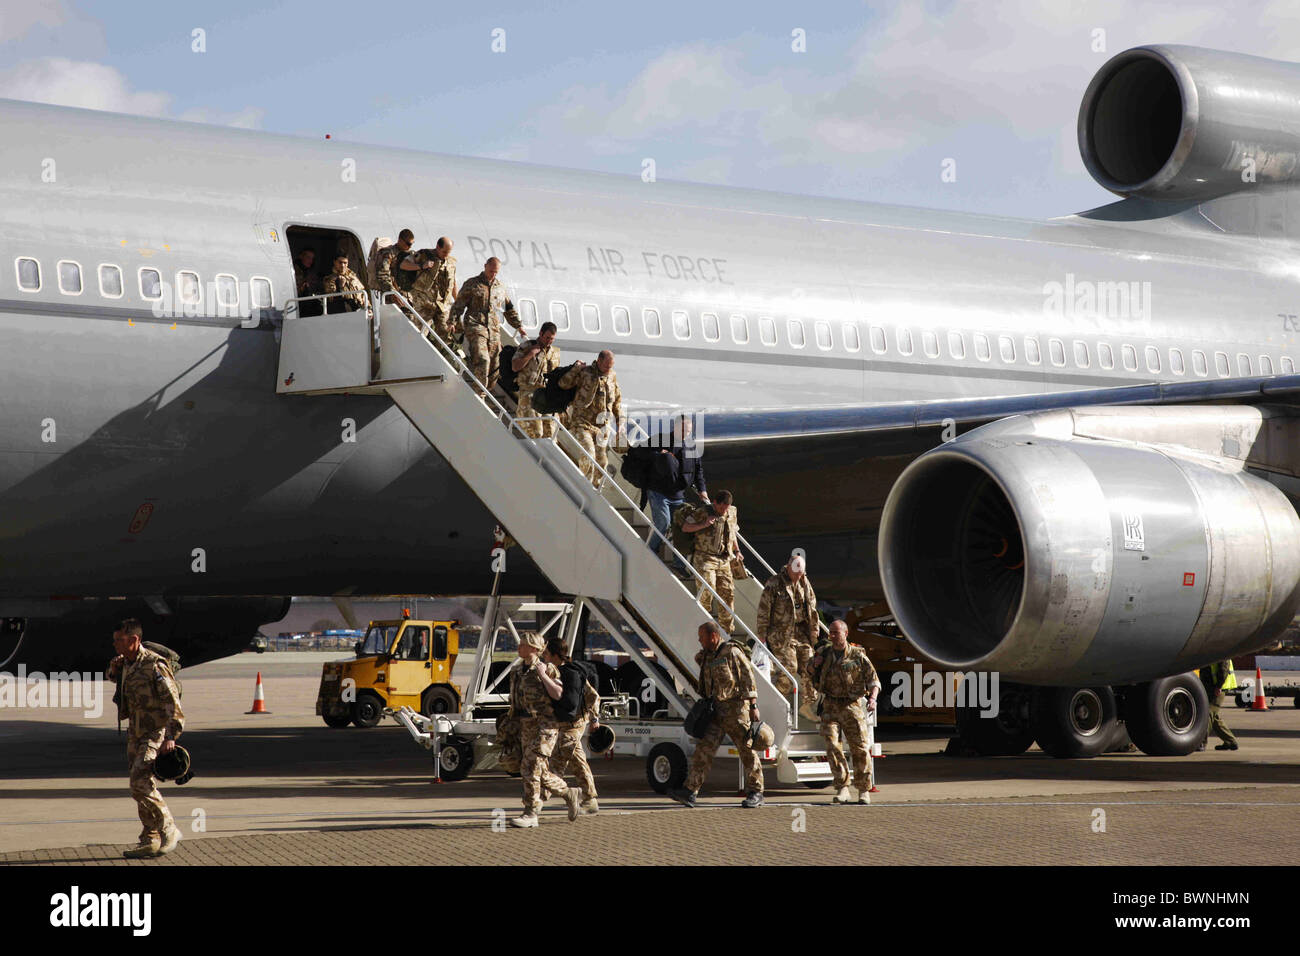 Soldiers arrive from active service in Afghanistan by Tristar airplane at Royal Air Force RAF Brize Norton airbase Stock Photo